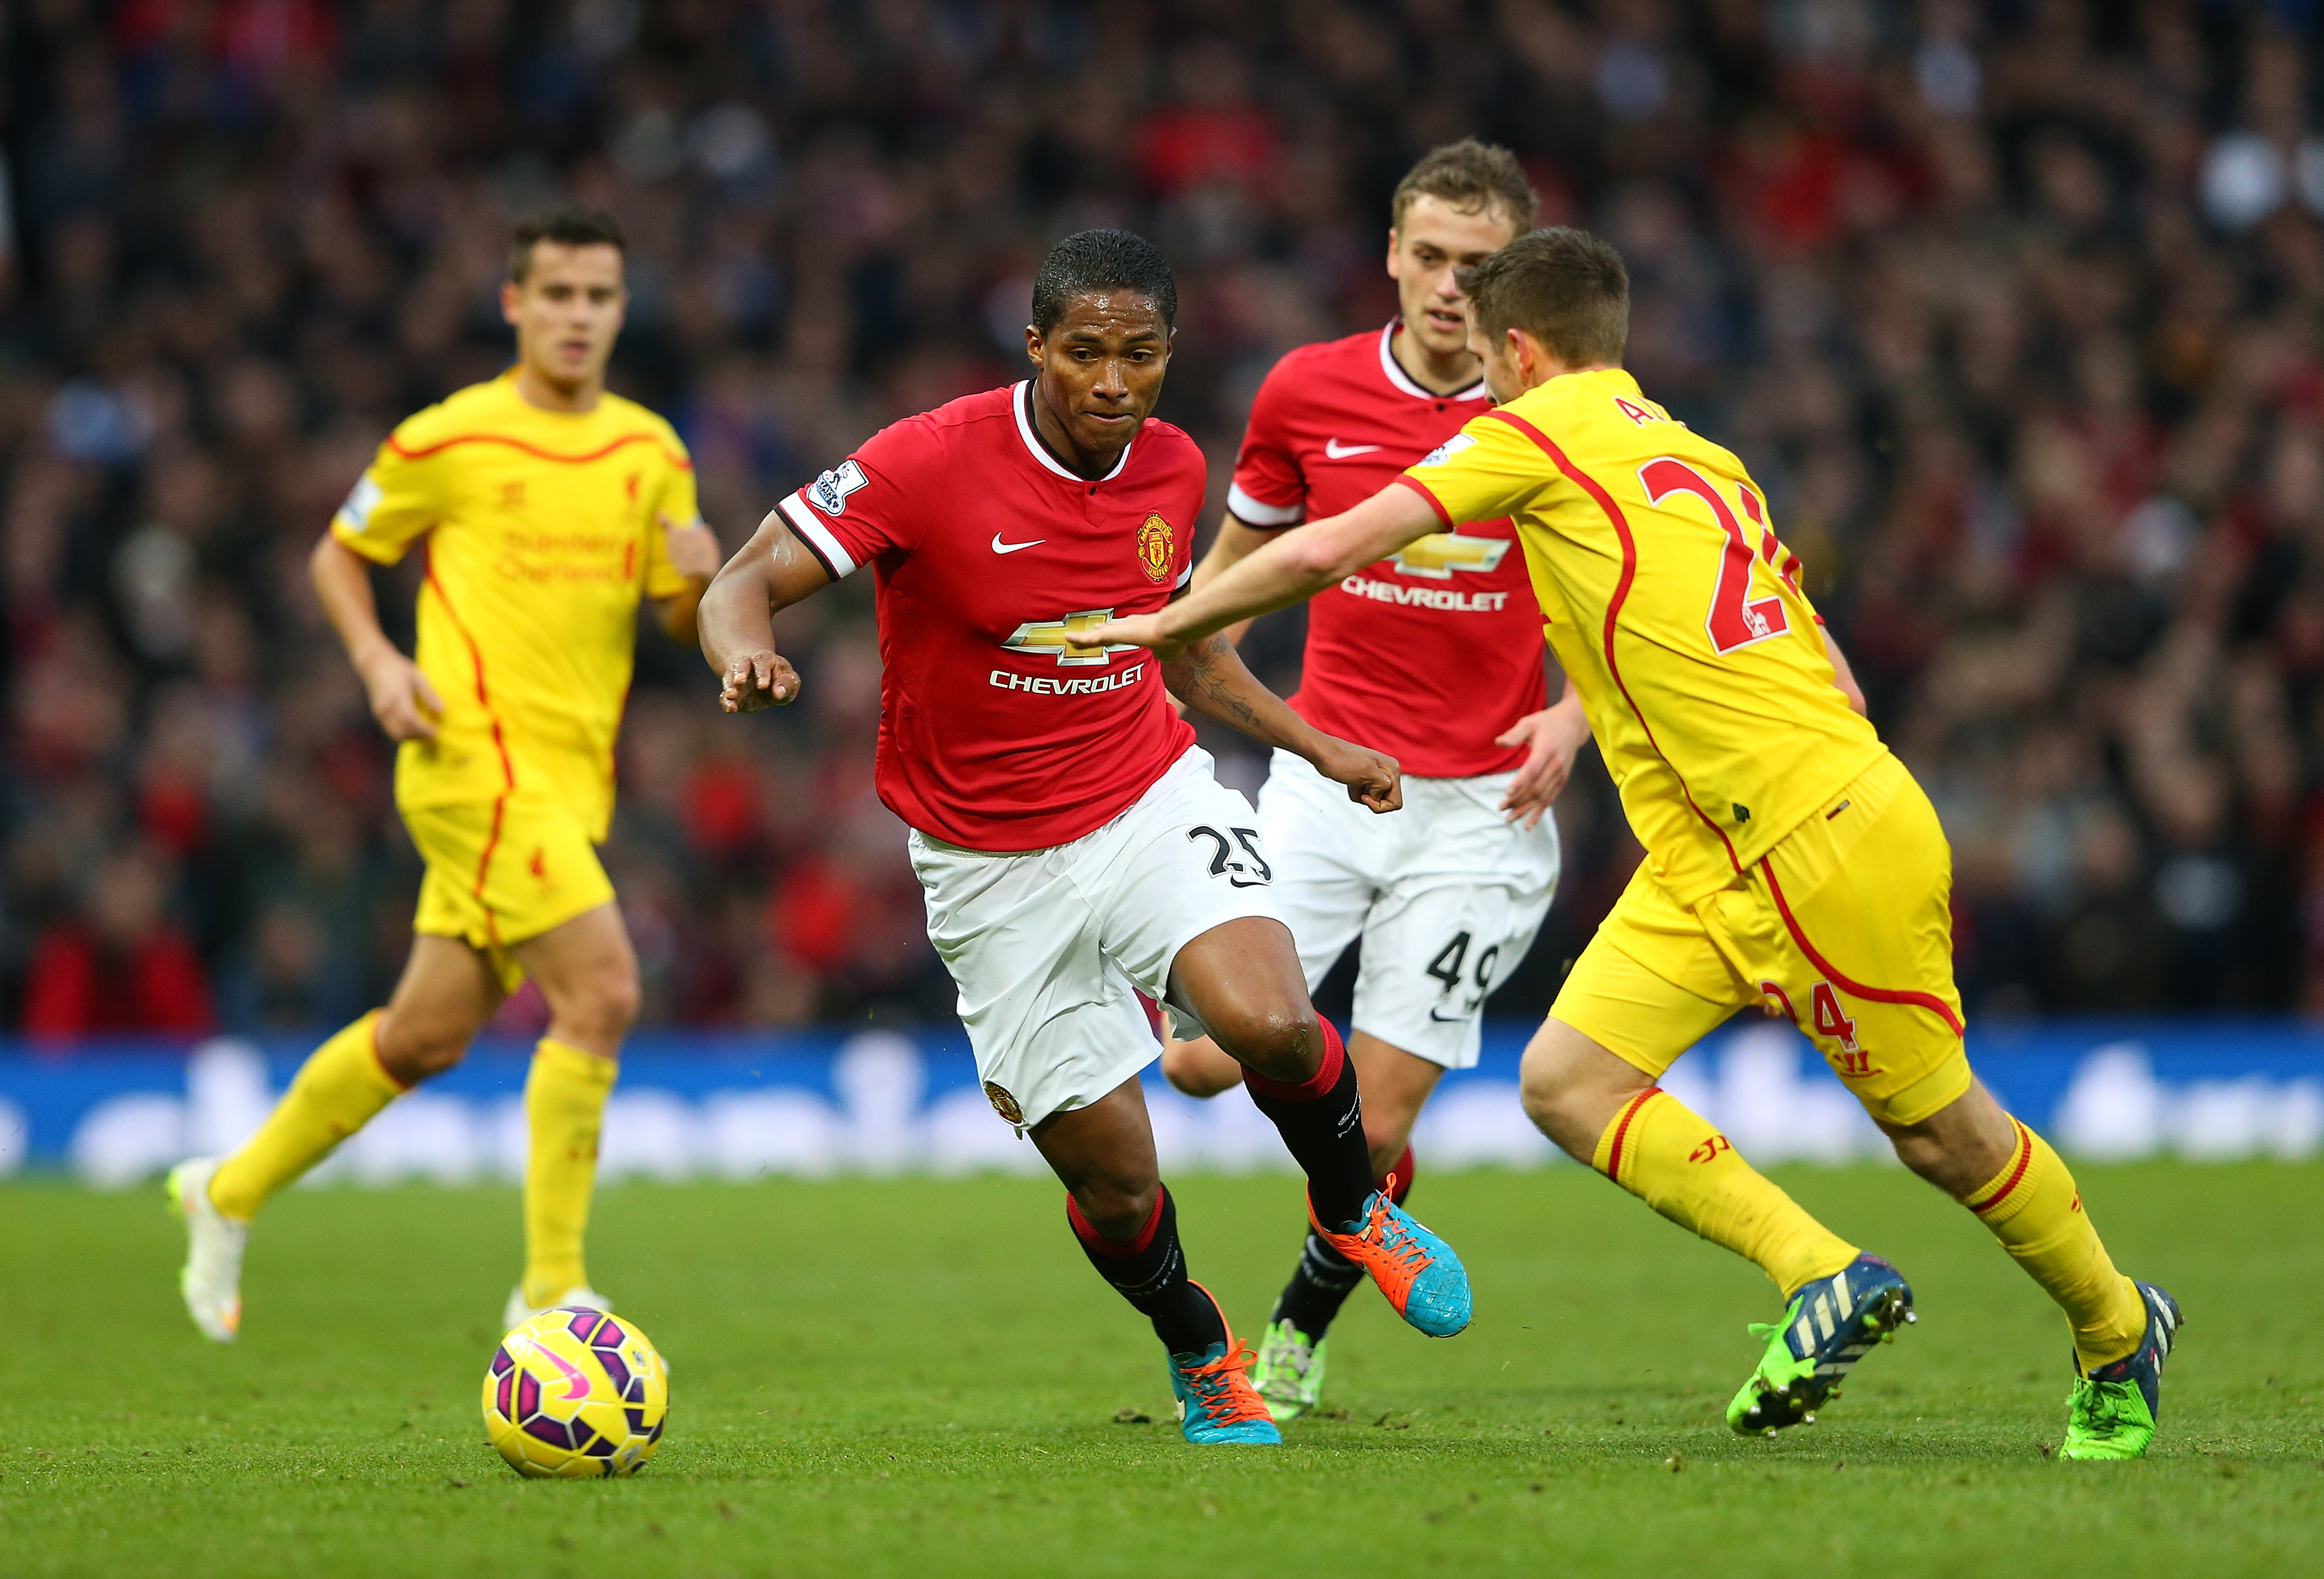 Liverpool vs Manchester United : How the two rivals swapped fortunes in those 8 months of 2014